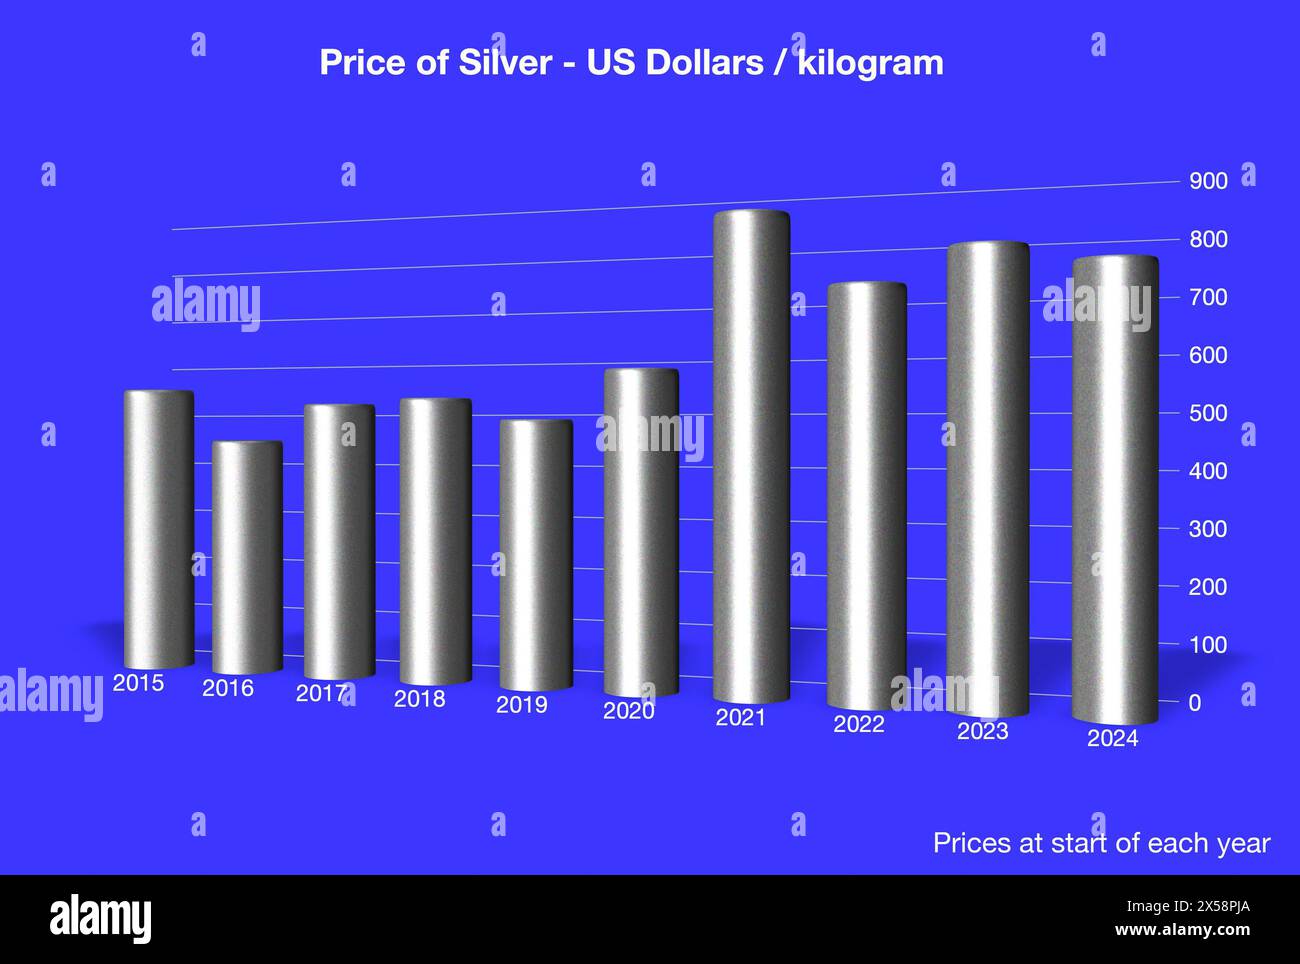 Silver price bar chart / graph with 3D effect showing actual price in US Dollars at the start of each year from 2015-2024 Stock Photo